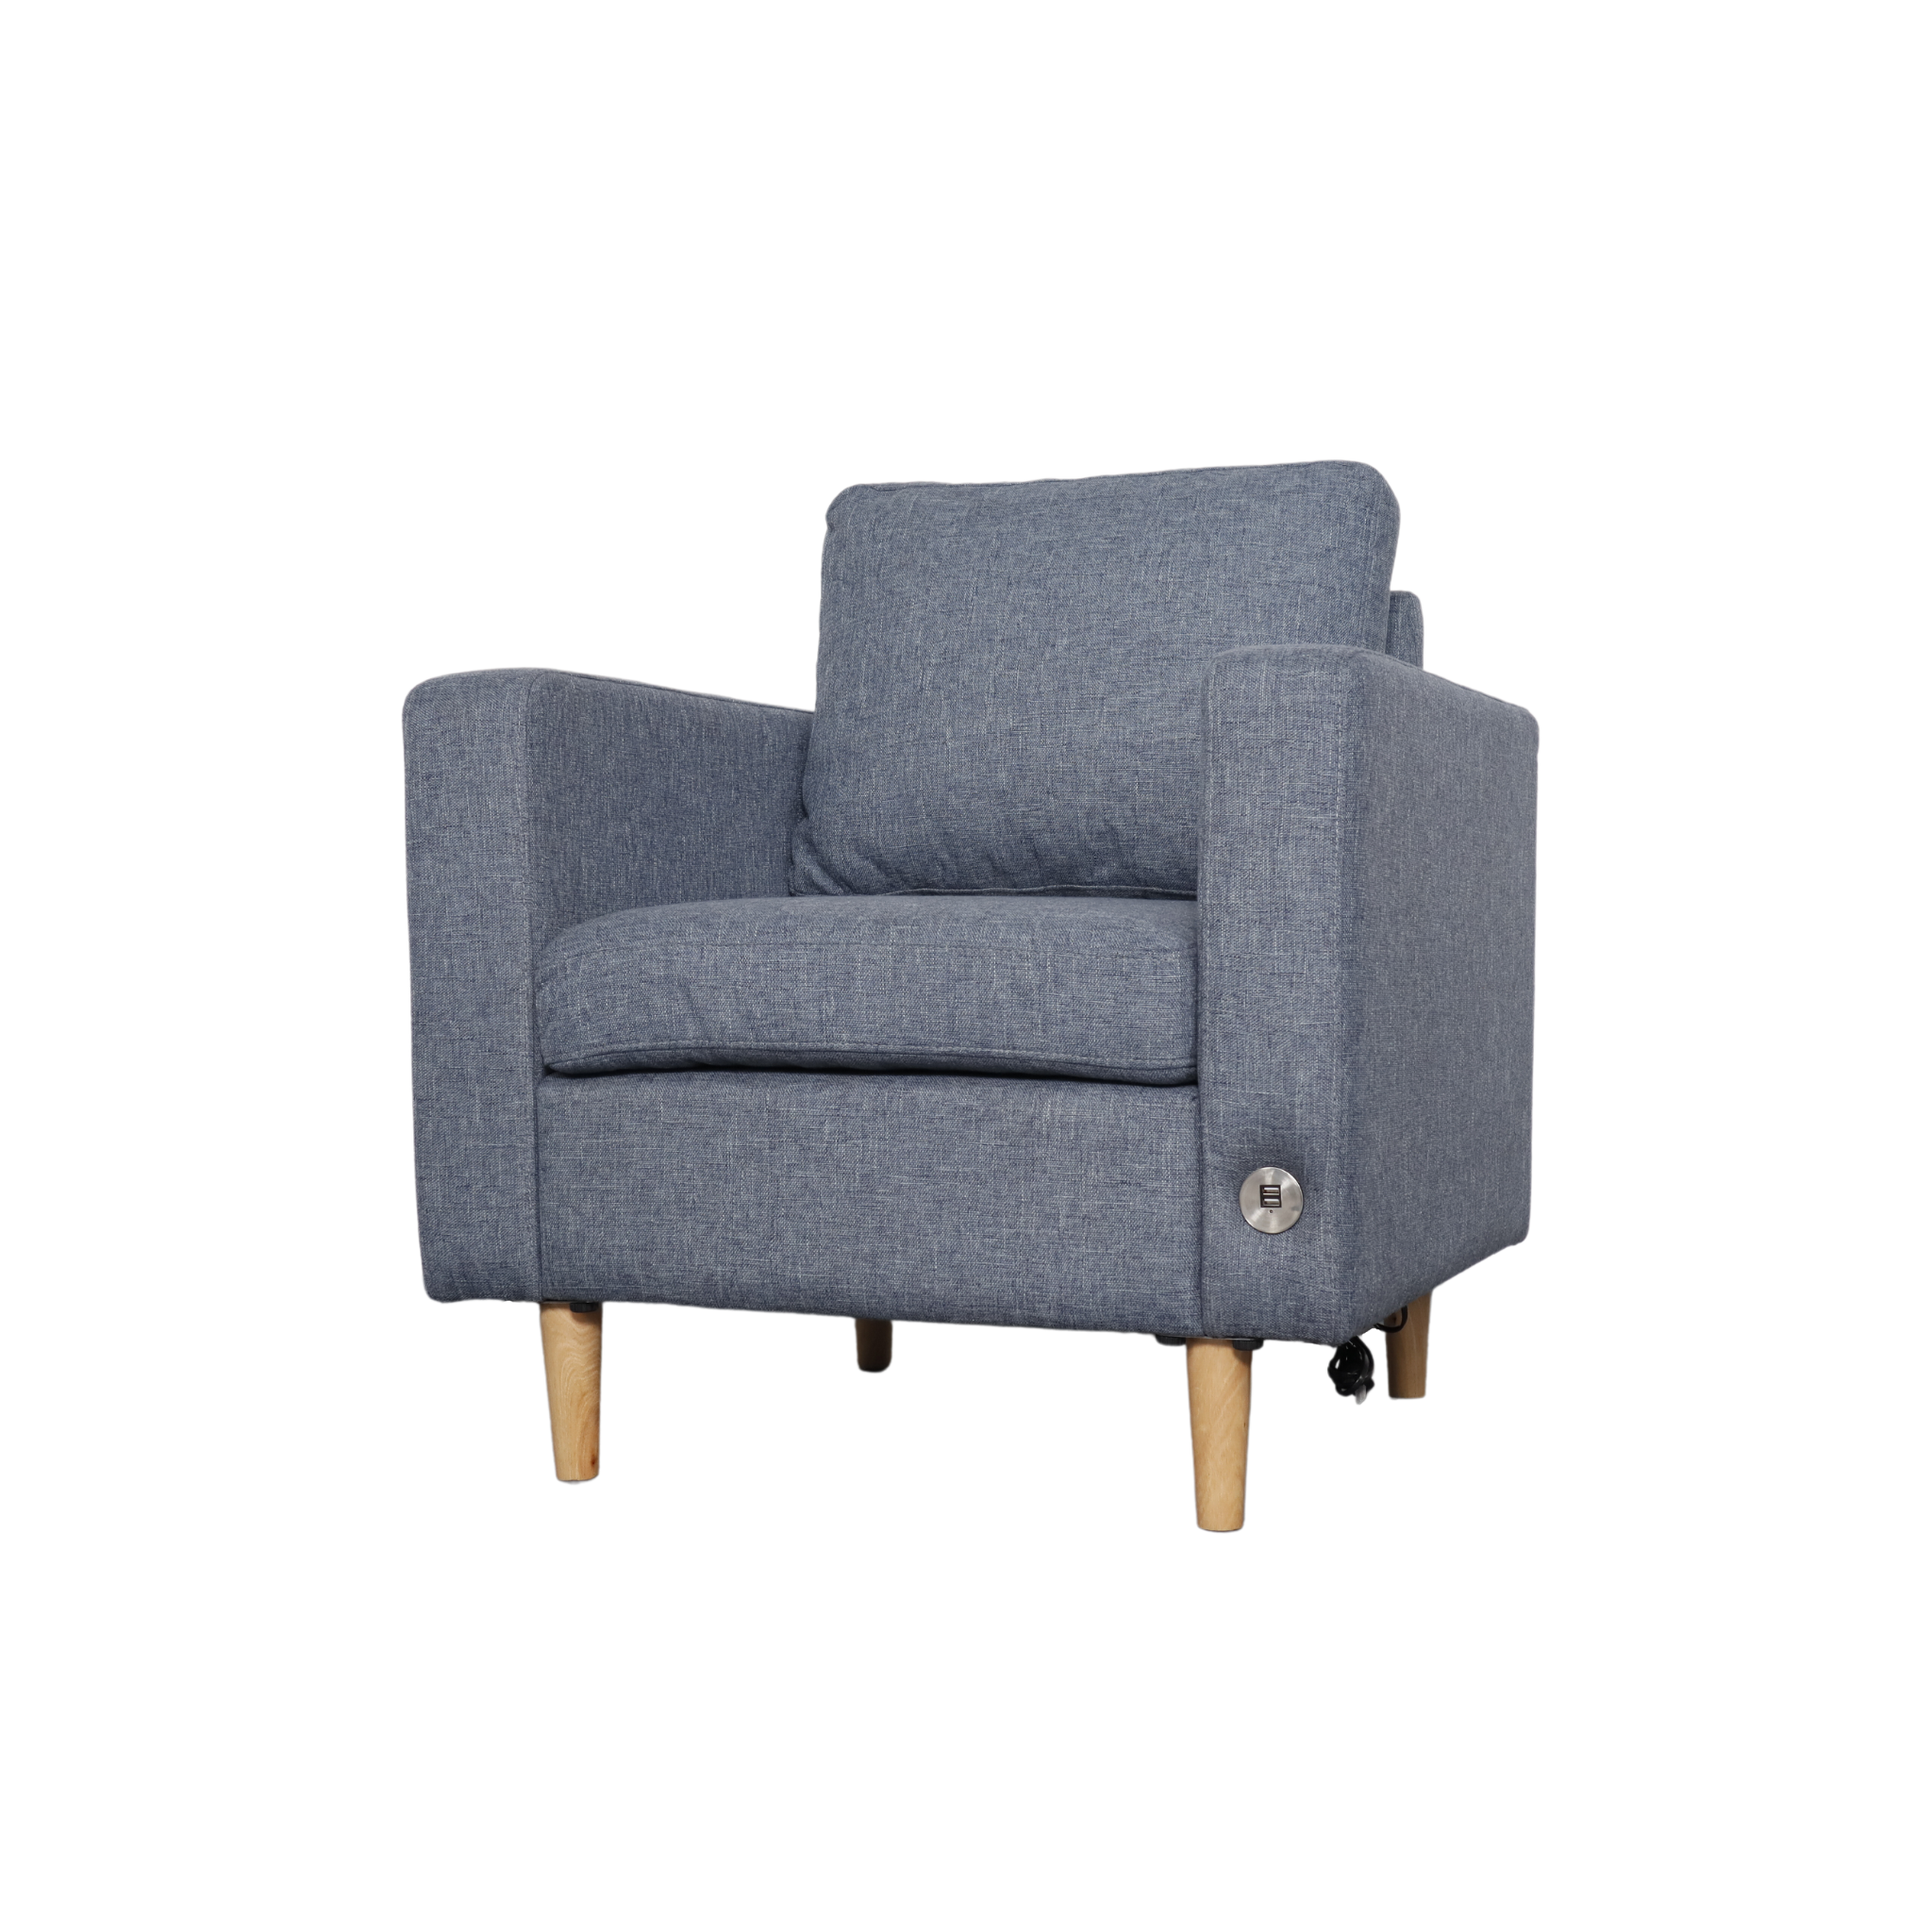 Tinker - Cocoon Series 1-Seater Fabric Sofa AF Home